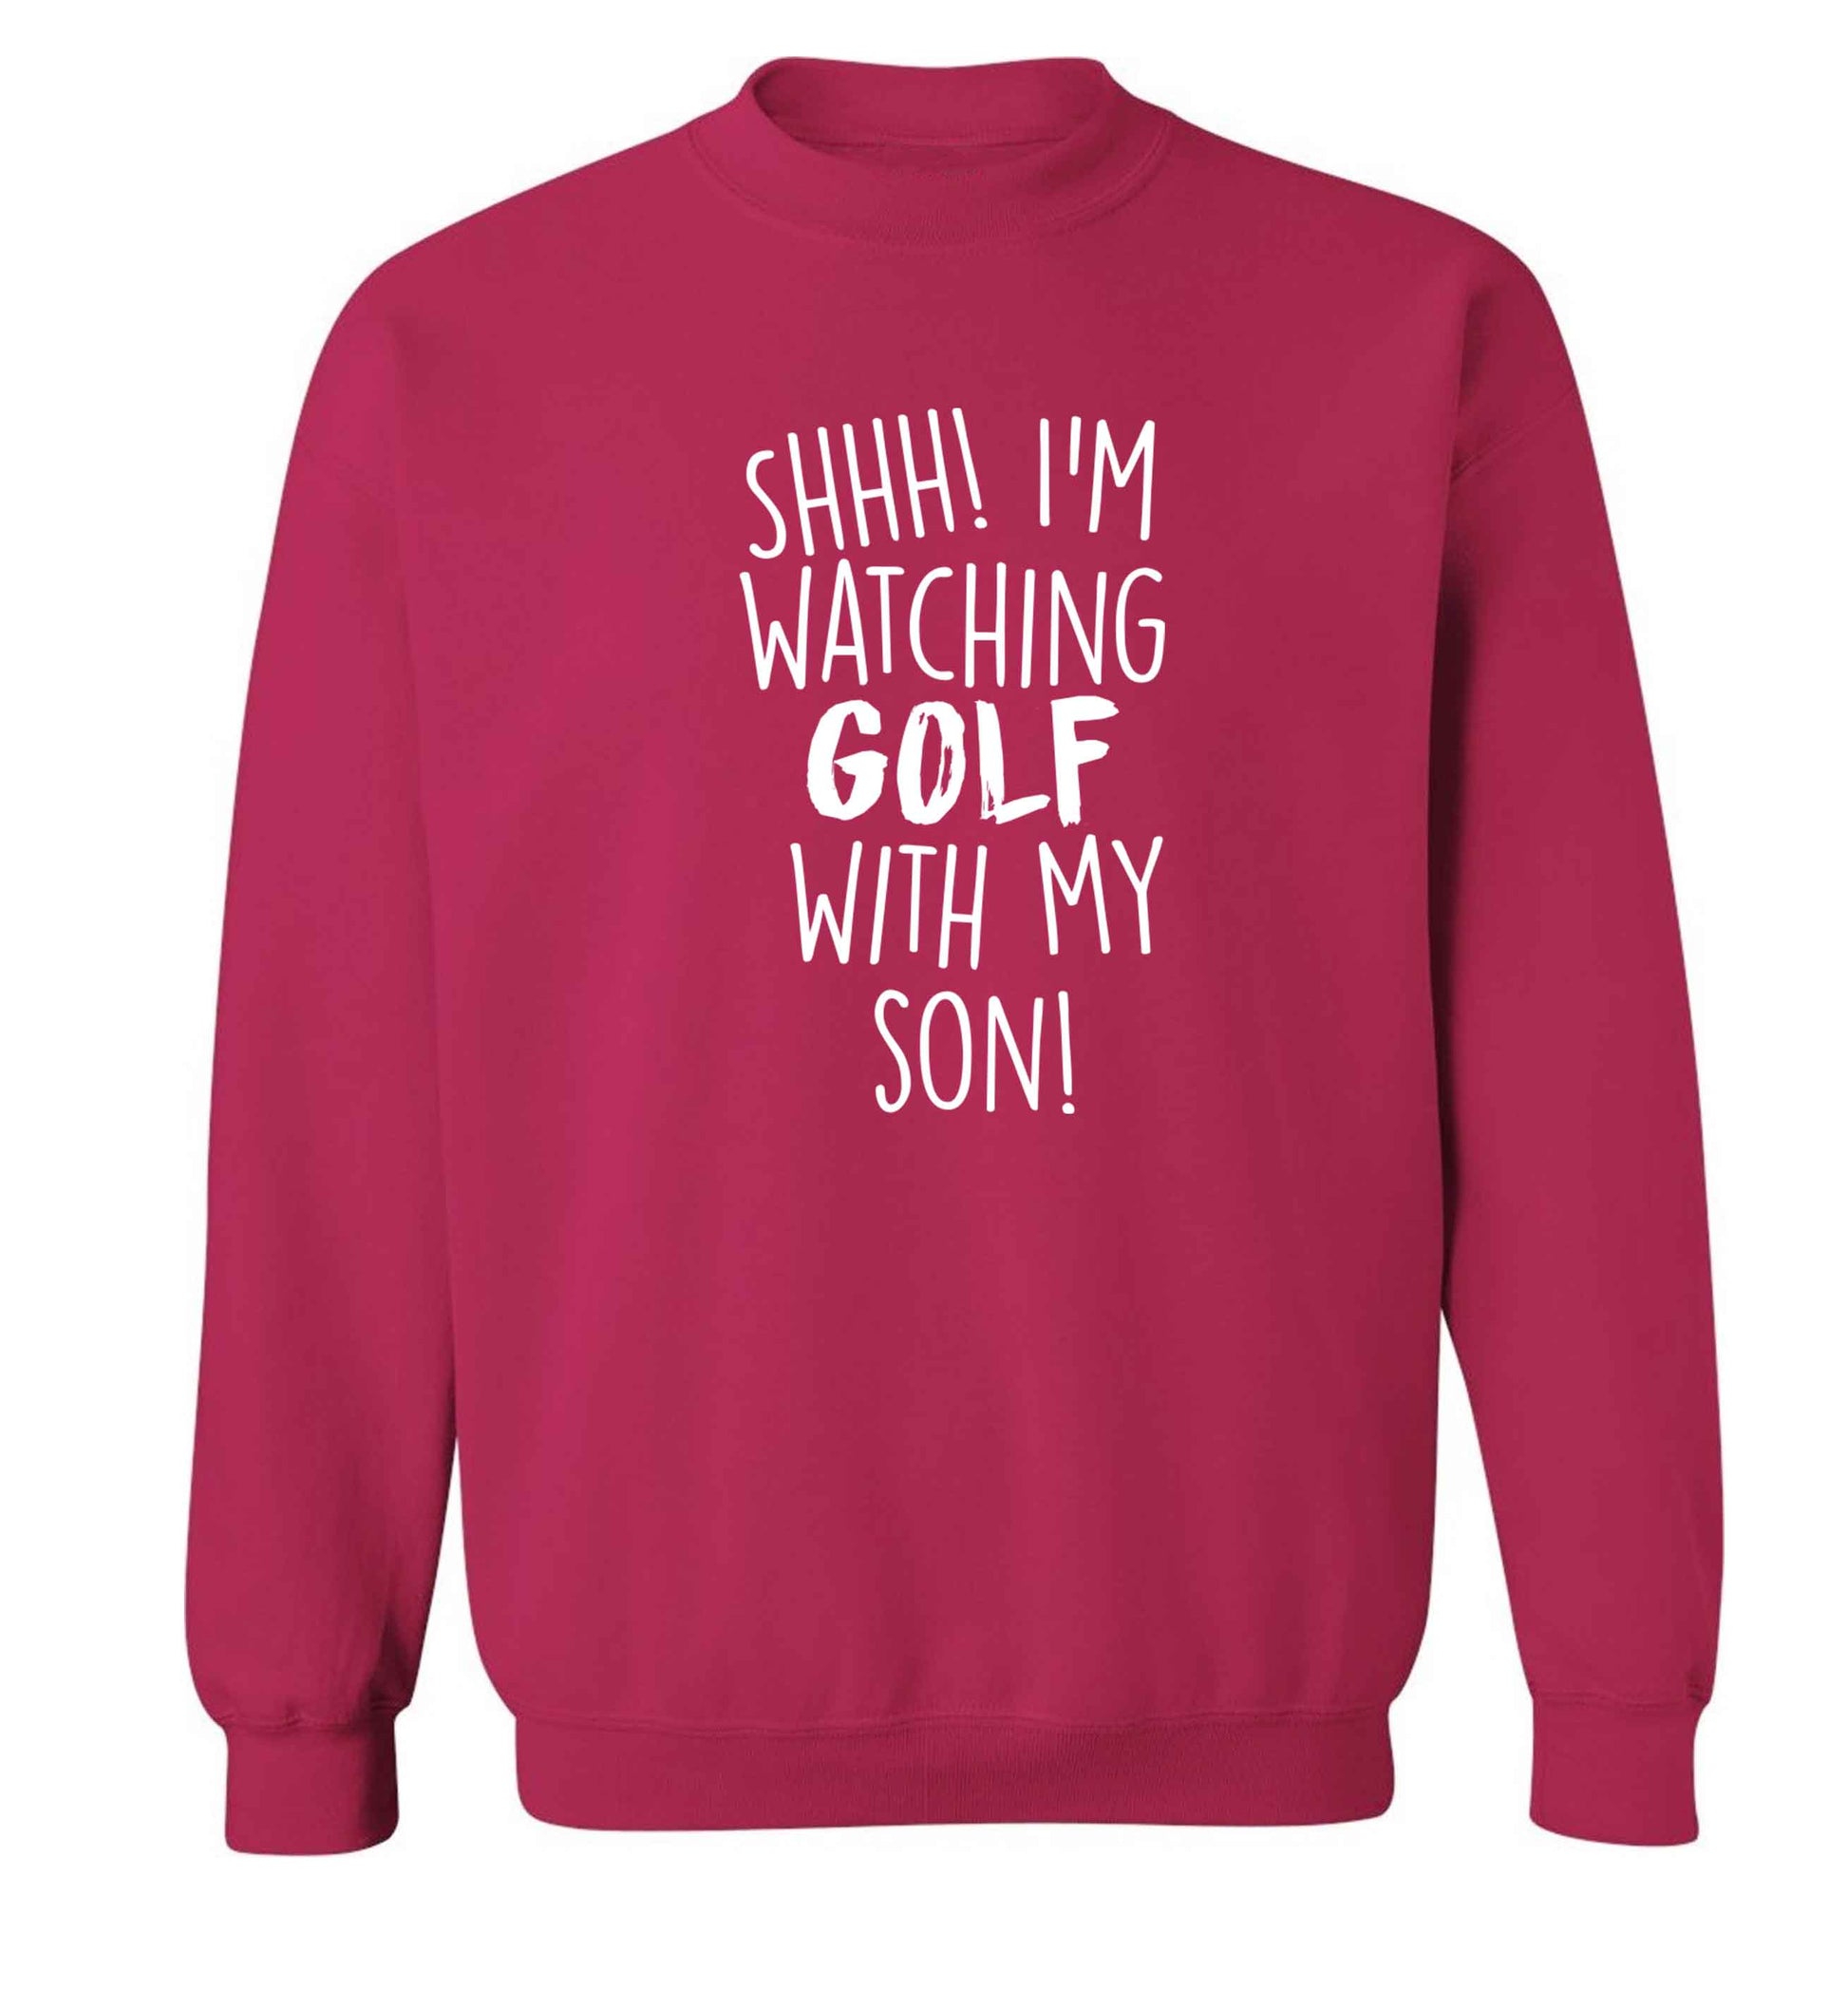 Shh I'm watching golf with my son Adult's unisex pink Sweater 2XL